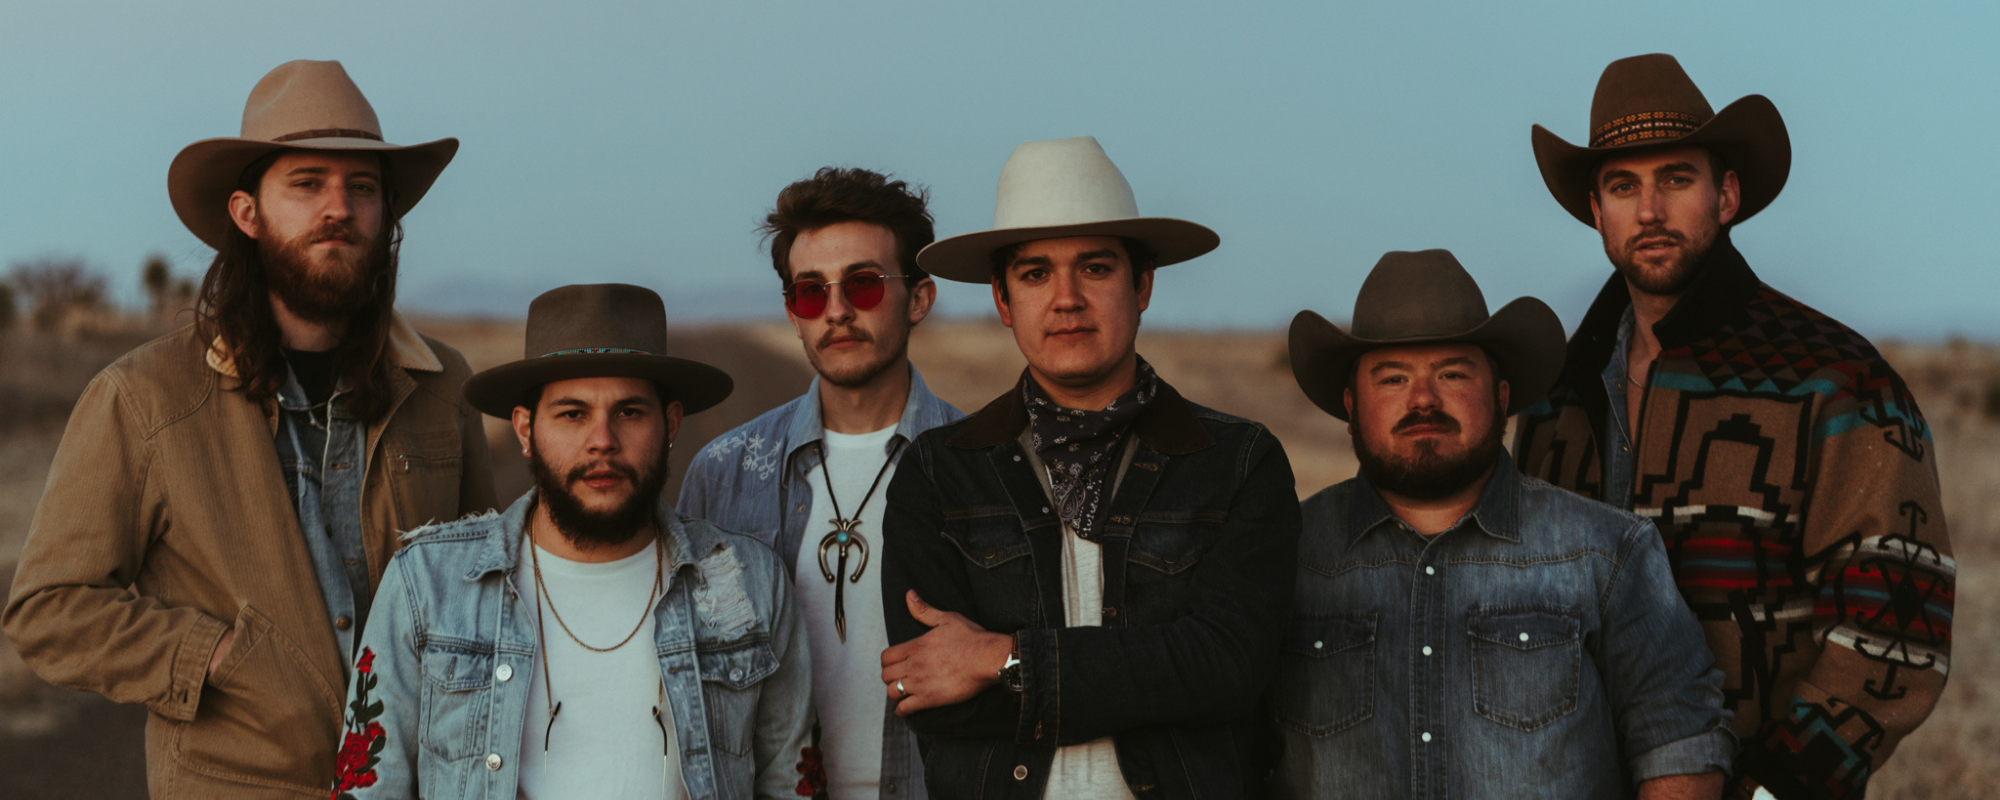 Flatland Cavalry Likens Their New LP ‘Welcome to Countryland’ to Country Music-Themed Amusement Park